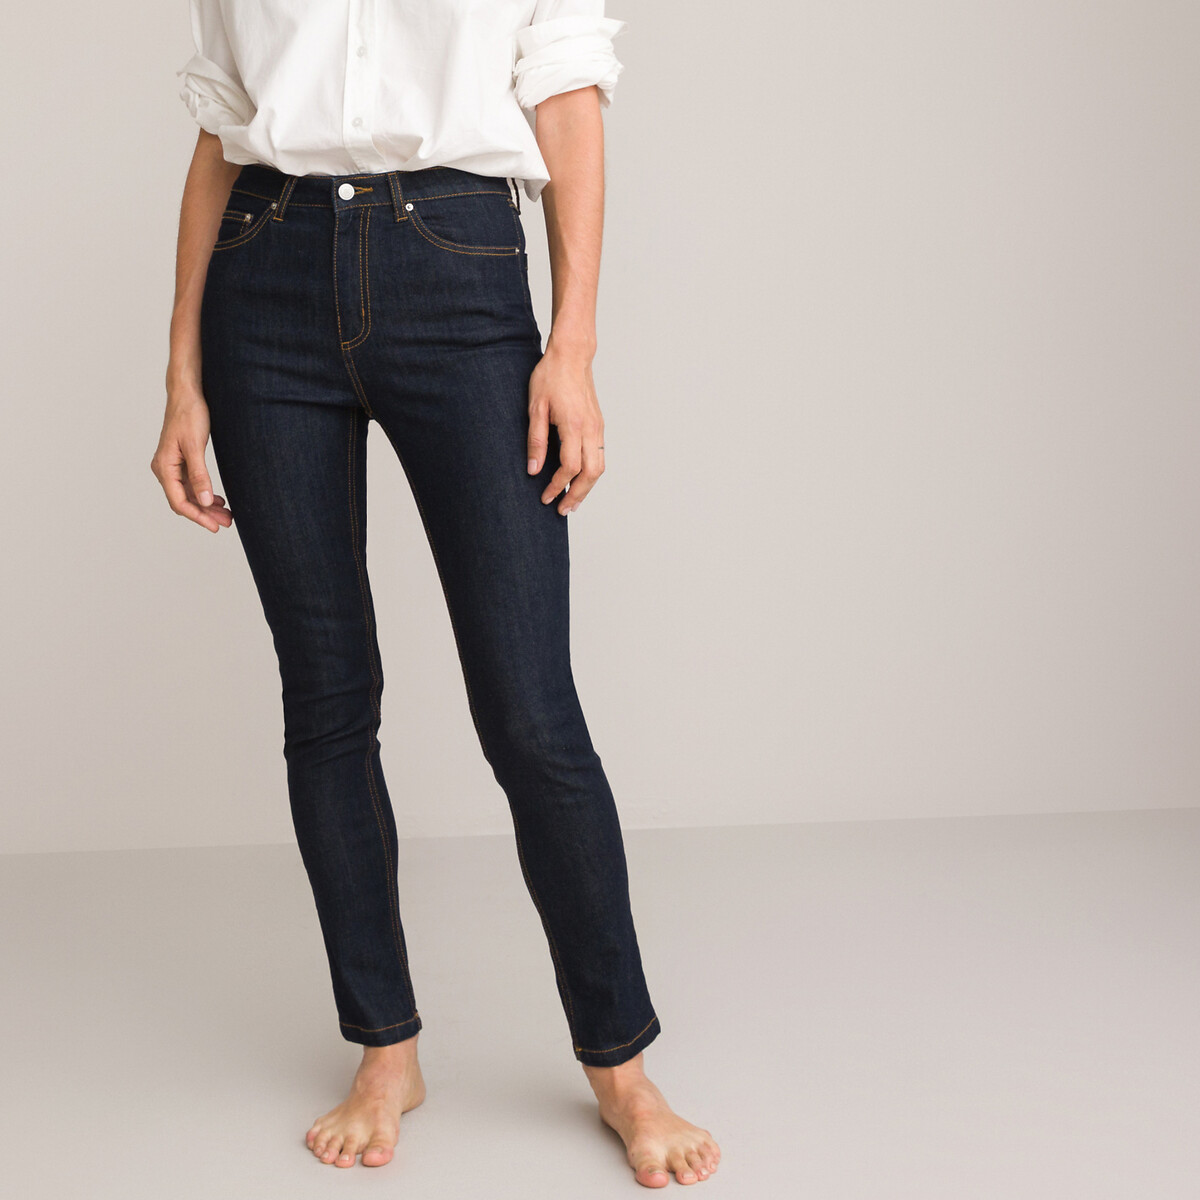 Organic cotton jeans in slim fit, mid rise, length 27.5